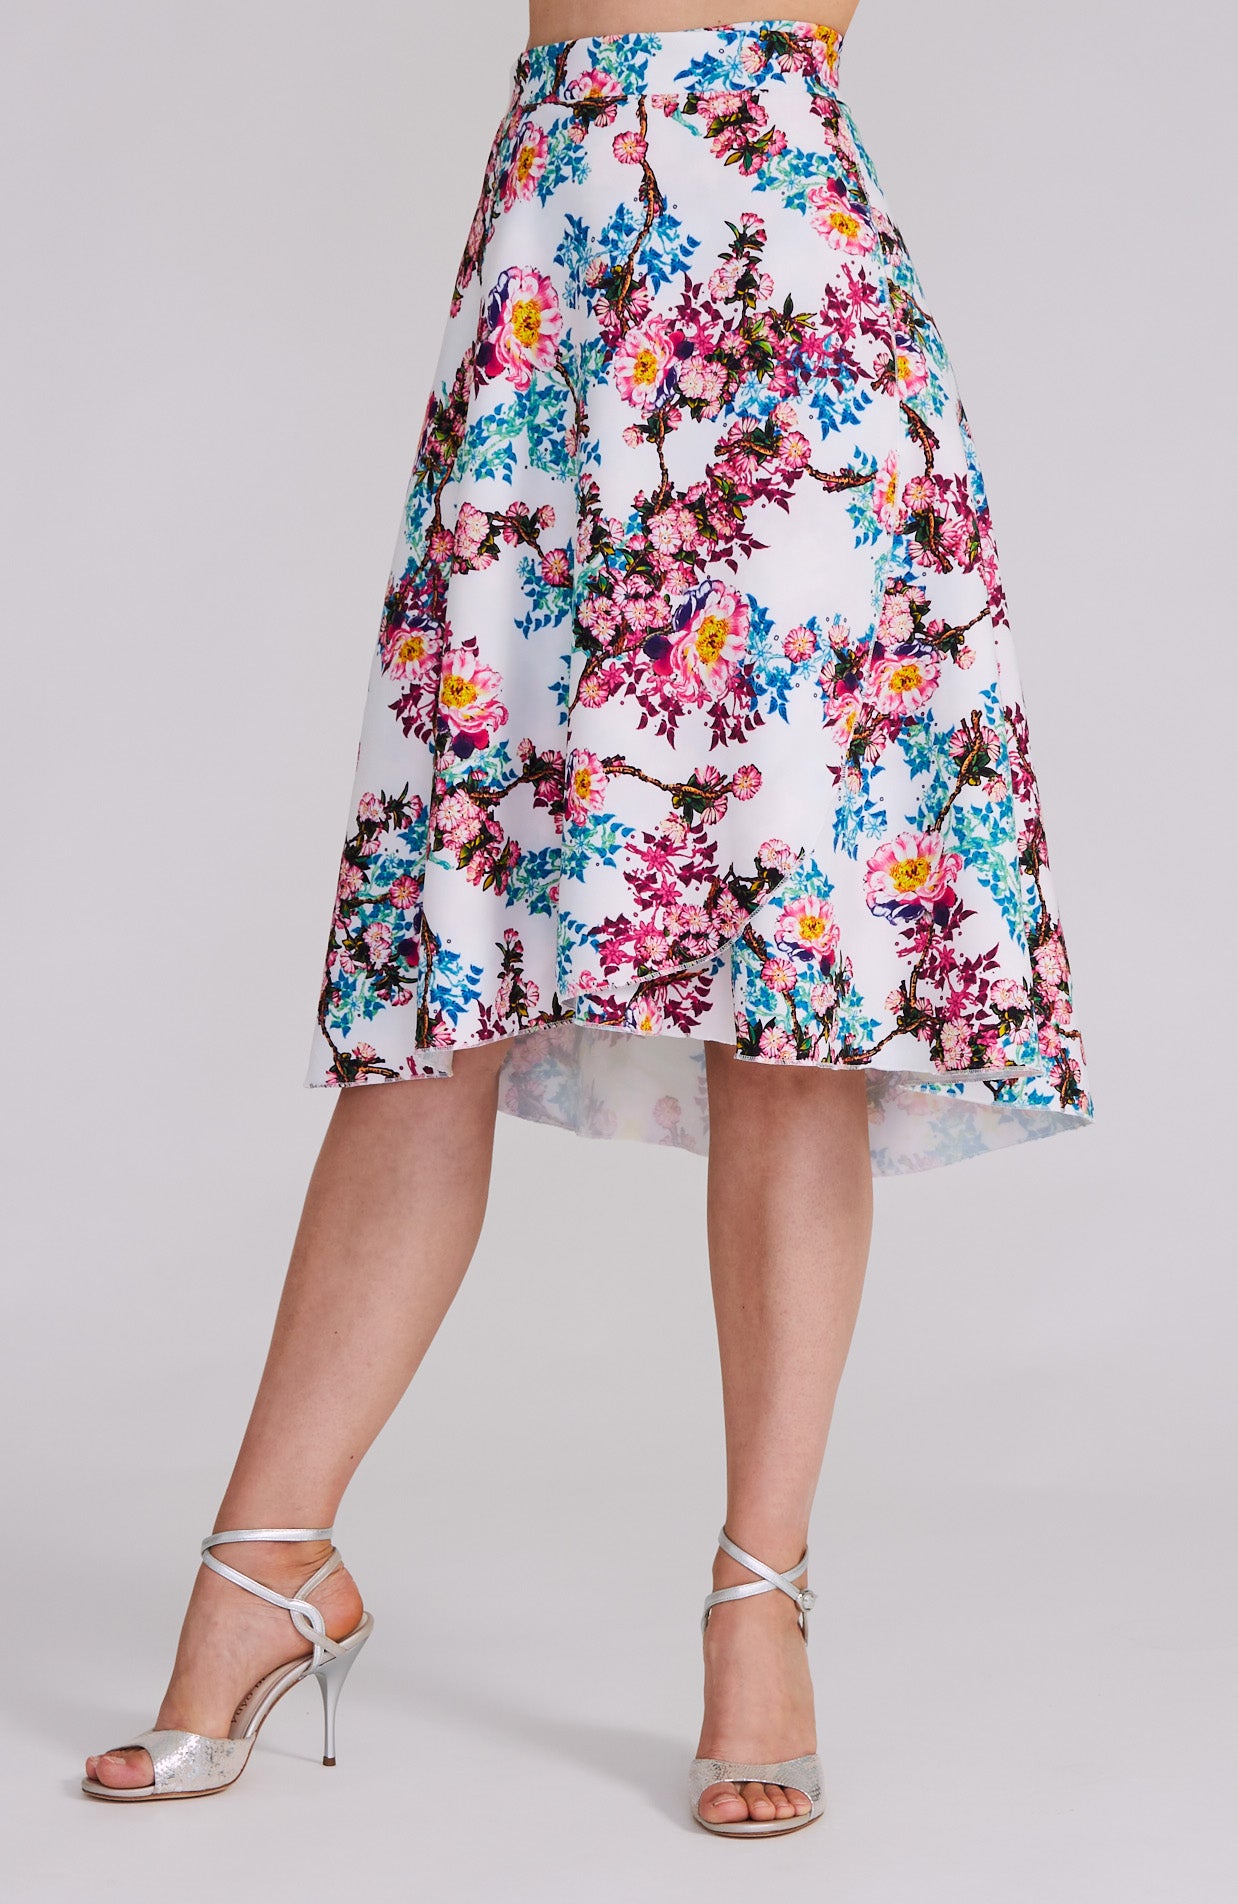 COCO - Wrap Skirt in Vivid Roses